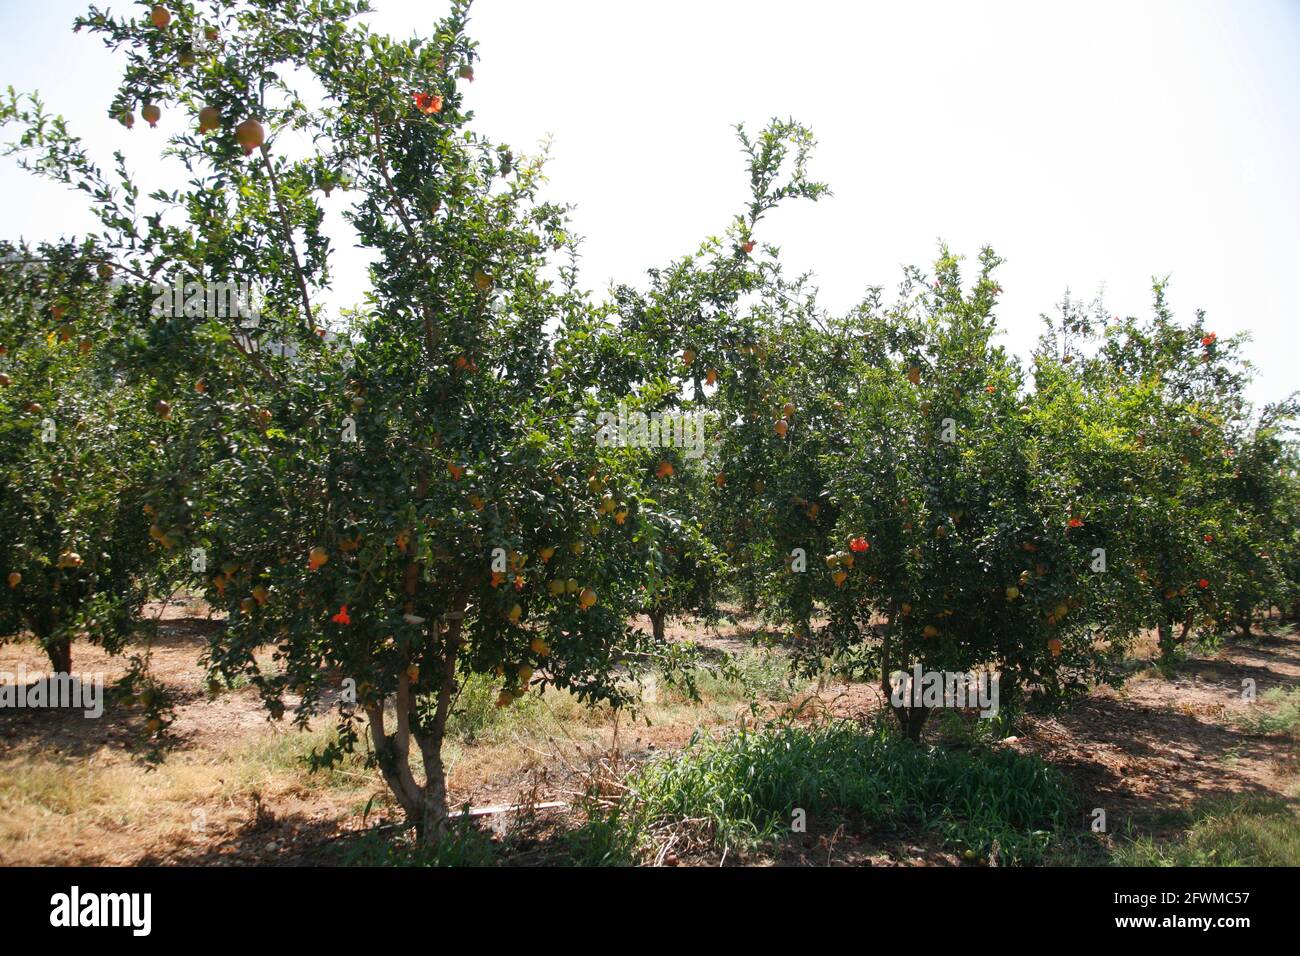 Orchard of Pomegranate Trees with ripe fruit on them in the Shephelah Hills, Lowlands or Judean Foothills near Sha'ar Hagai and Latrun. Israel. Stock Photo